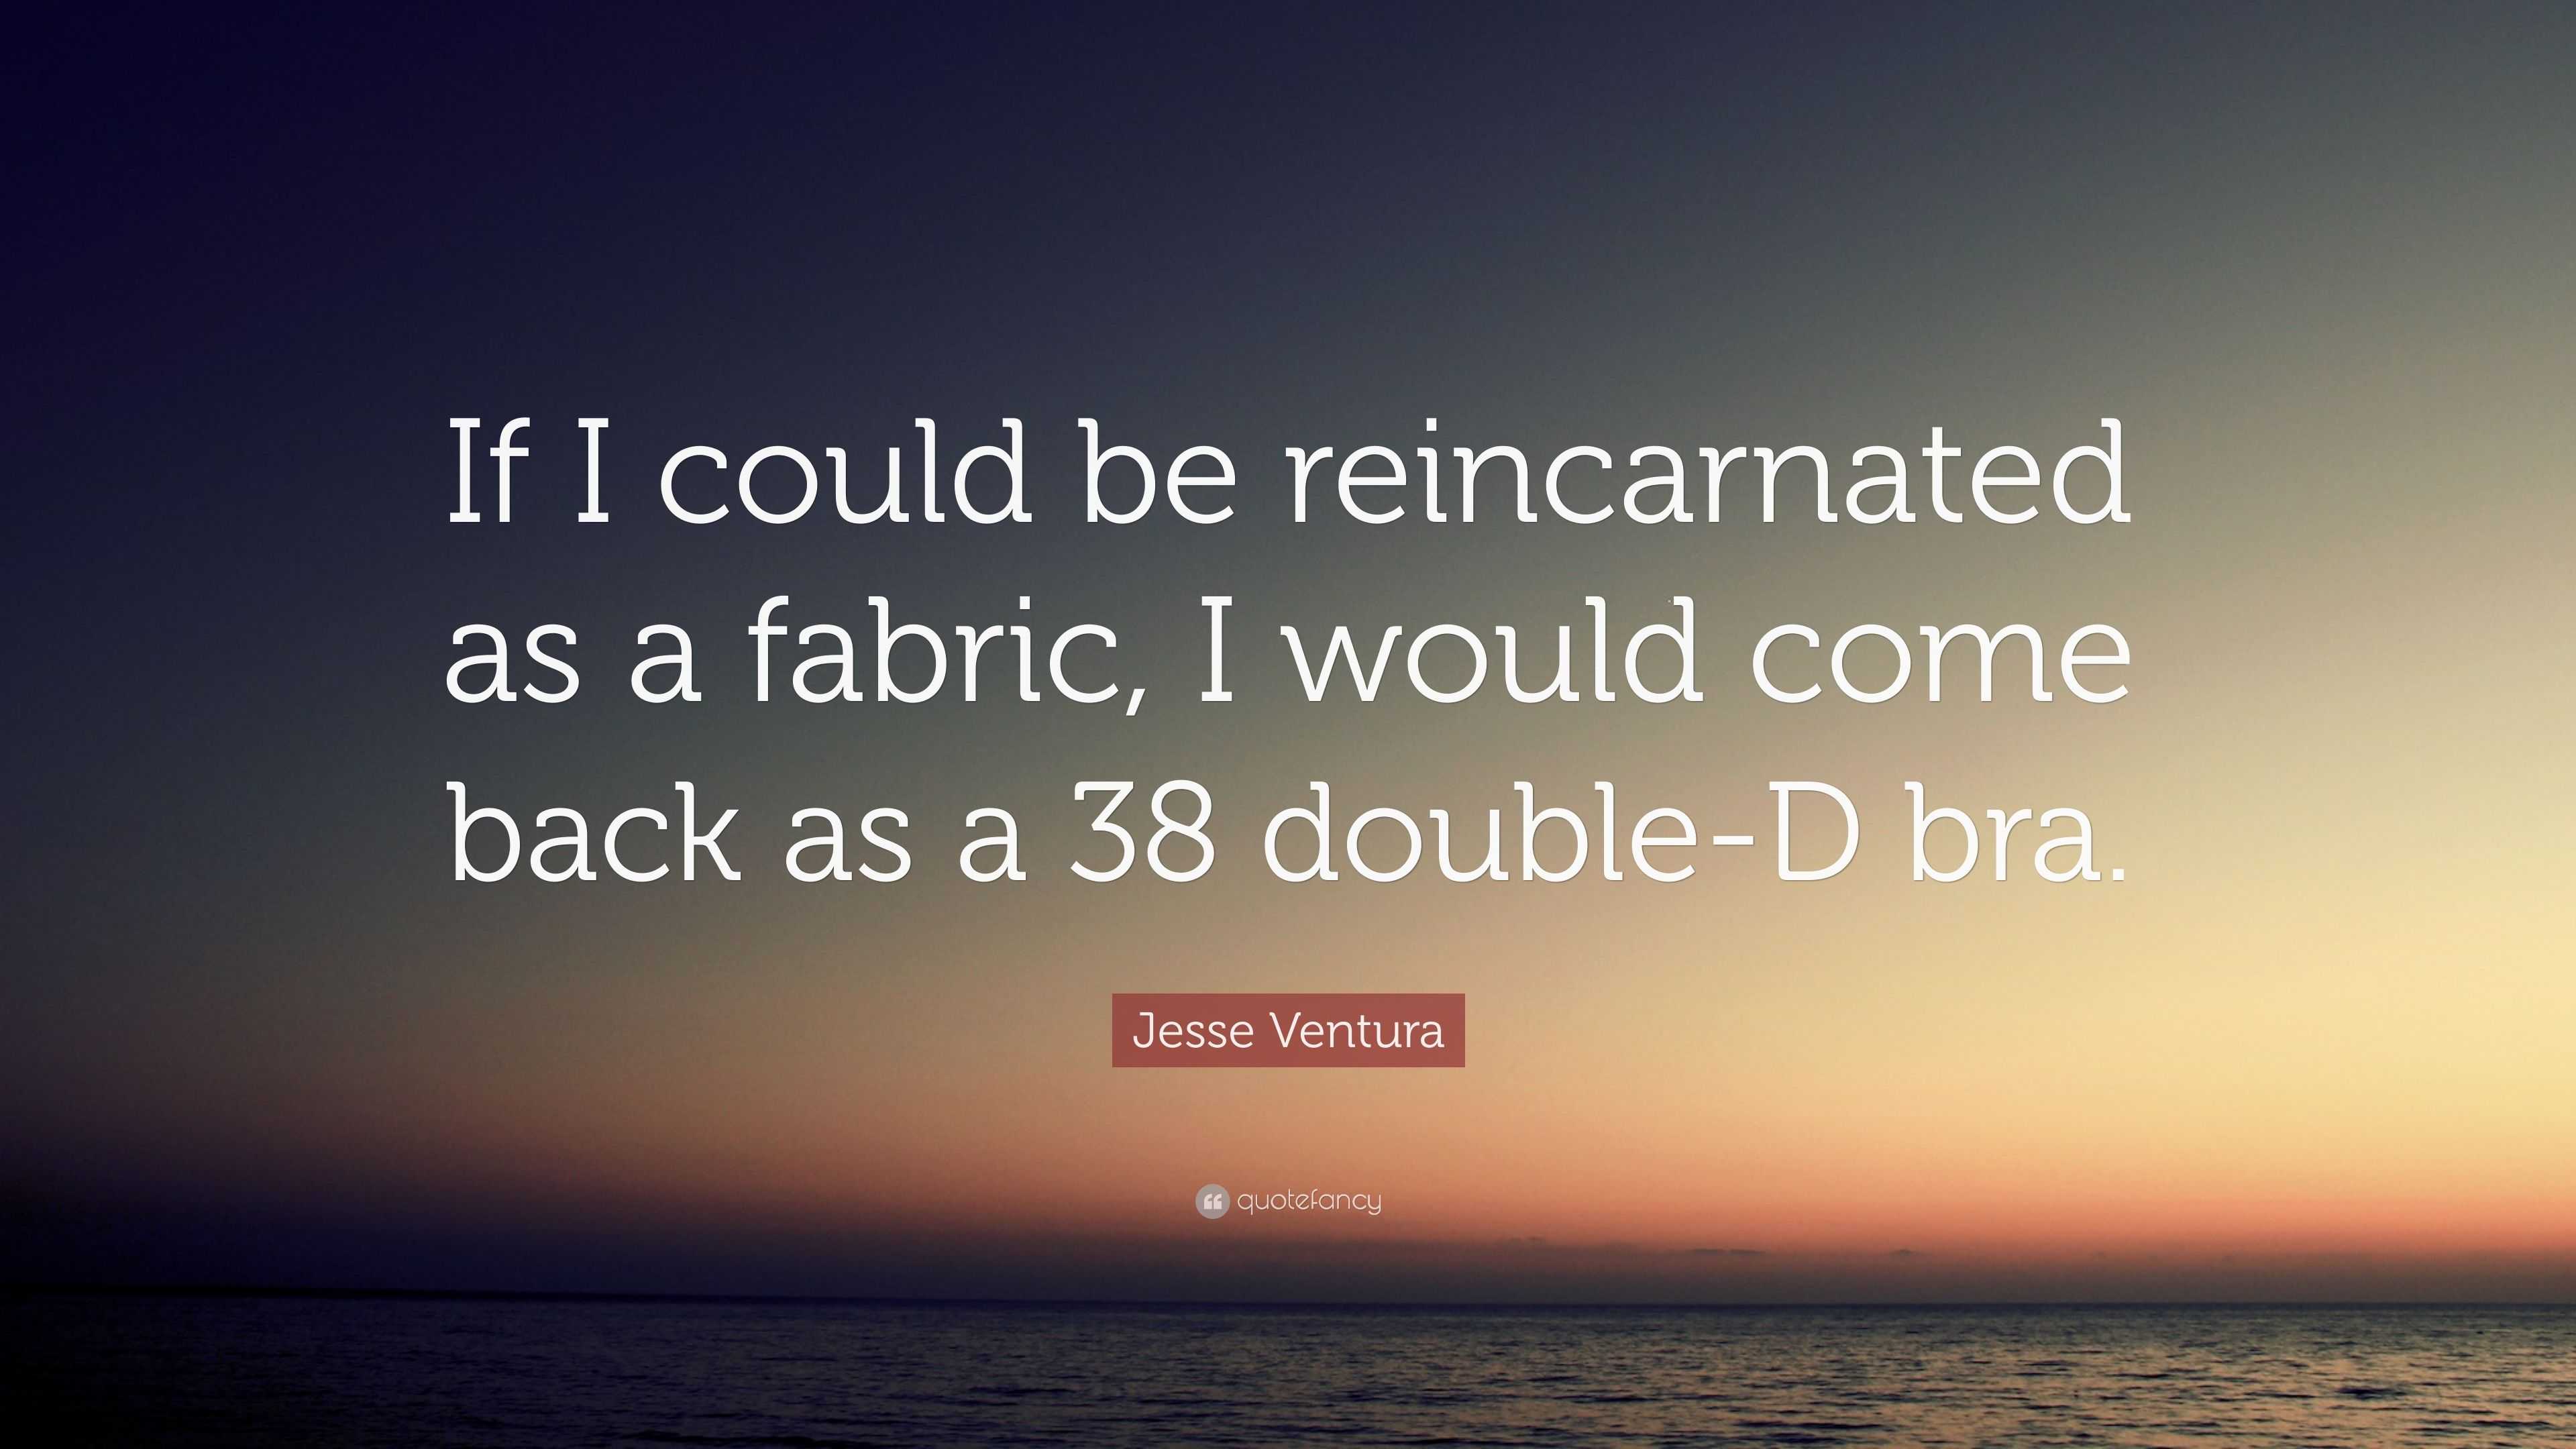 Jesse Ventura Quote: “If I could be reincarnated as a fabric, I would come  back as